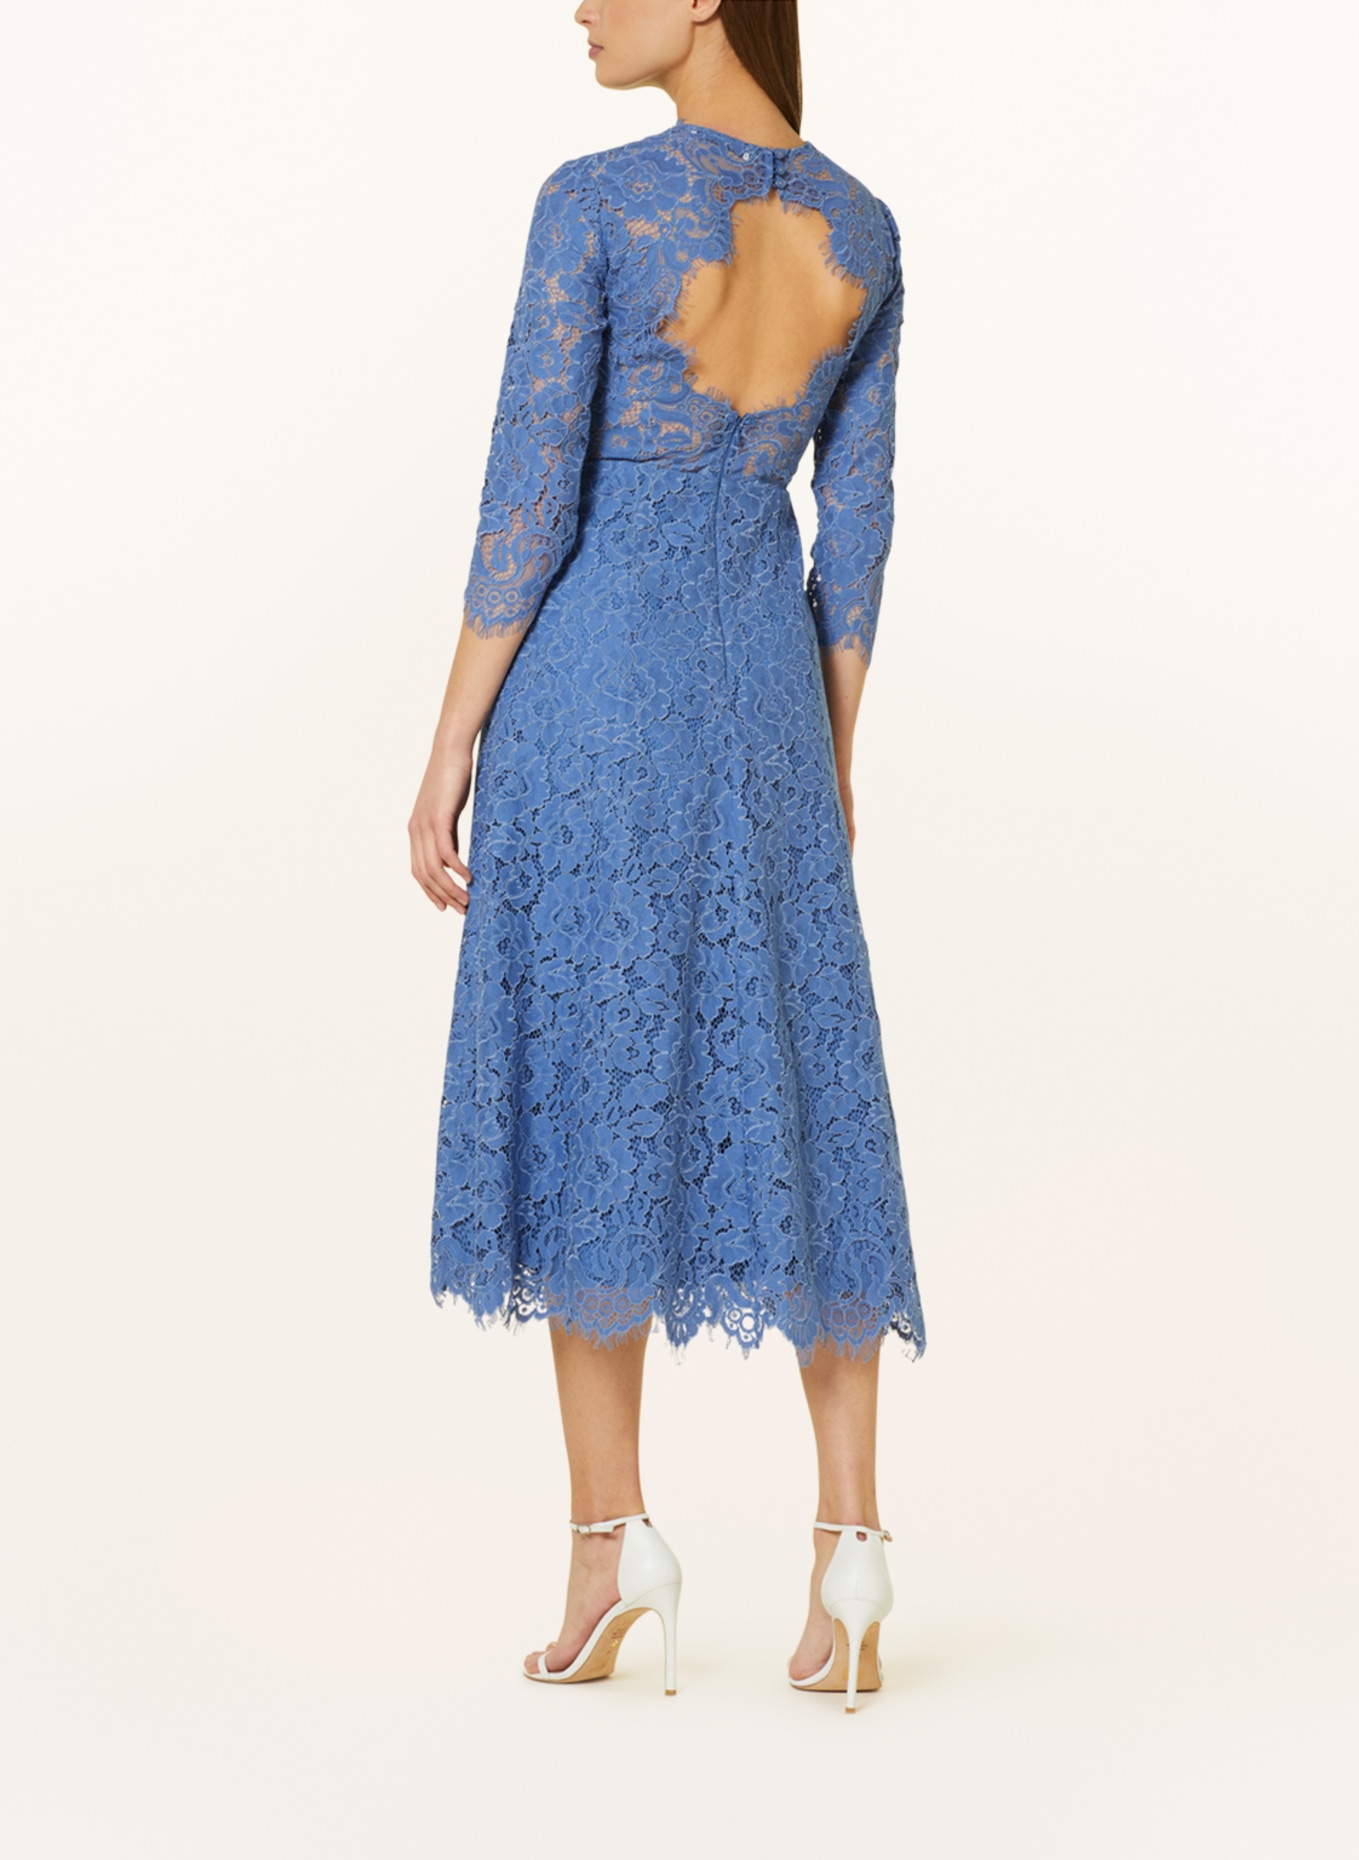 IVY OAK Cocktail dress MADELEINE in lace with cut-out, Color: BLUE (Image 3)